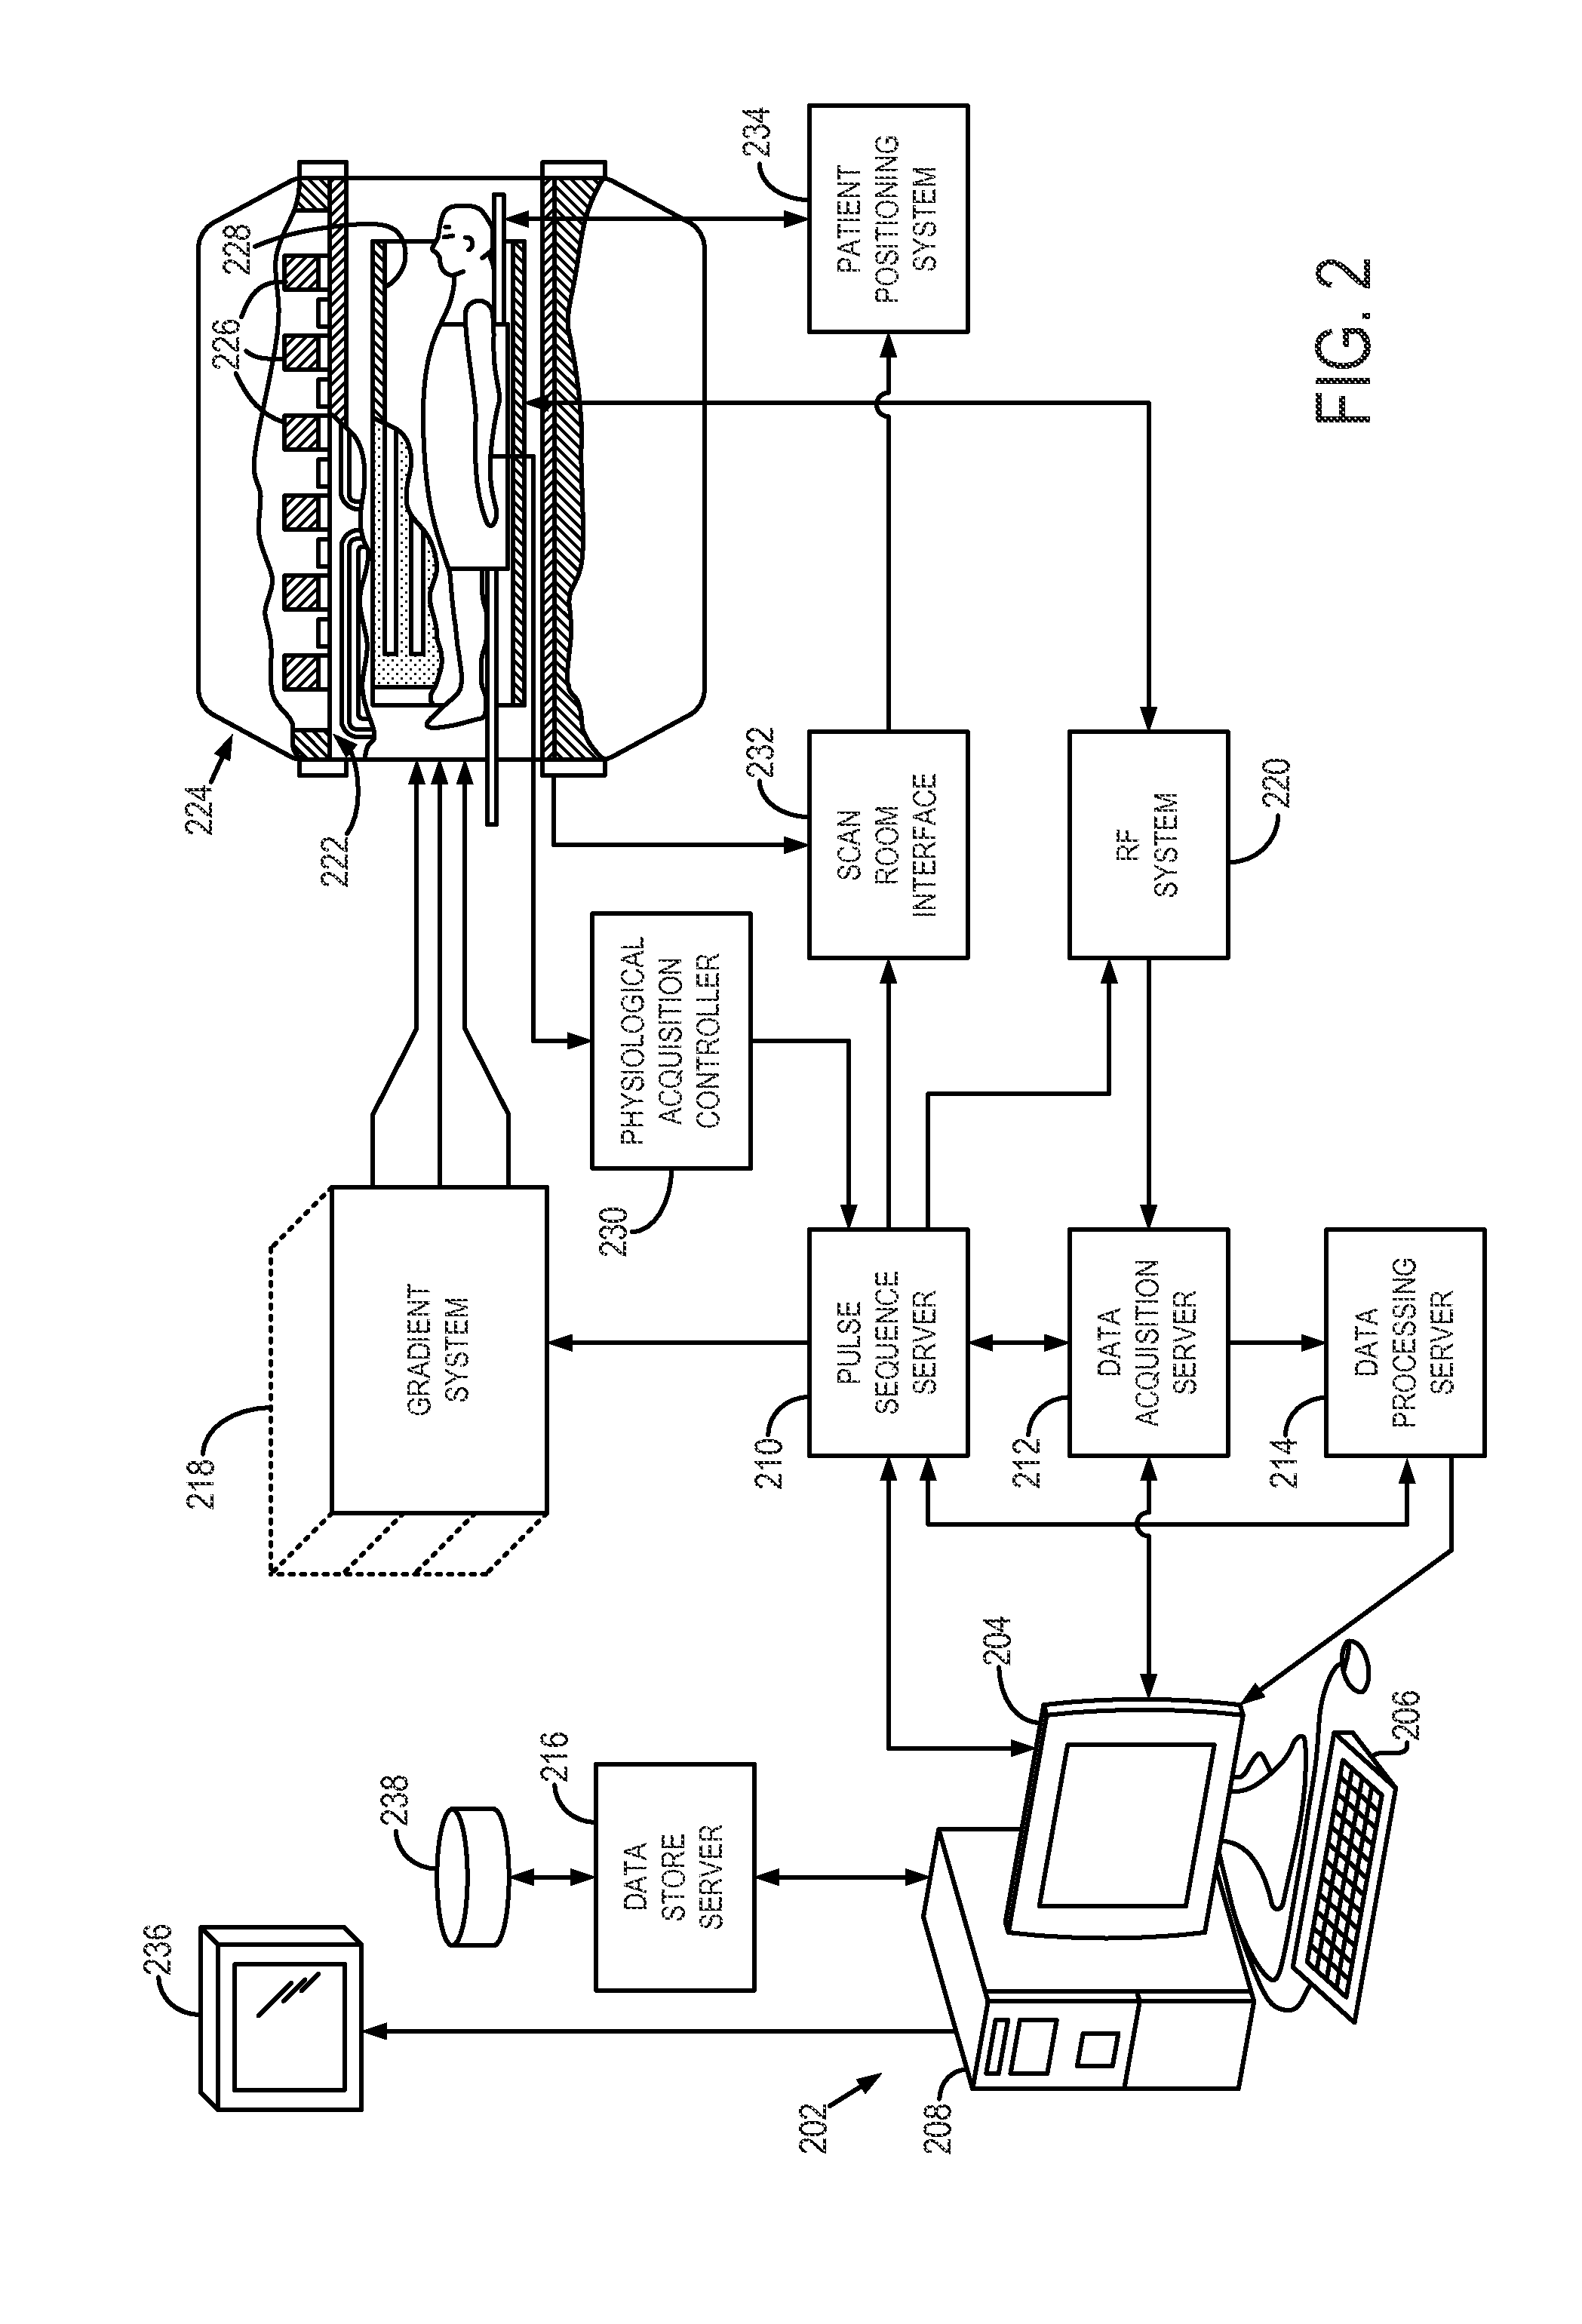 System and method for controlling calibration and delay phases of parallel, contrast-enhanced magnetic resonance imaging